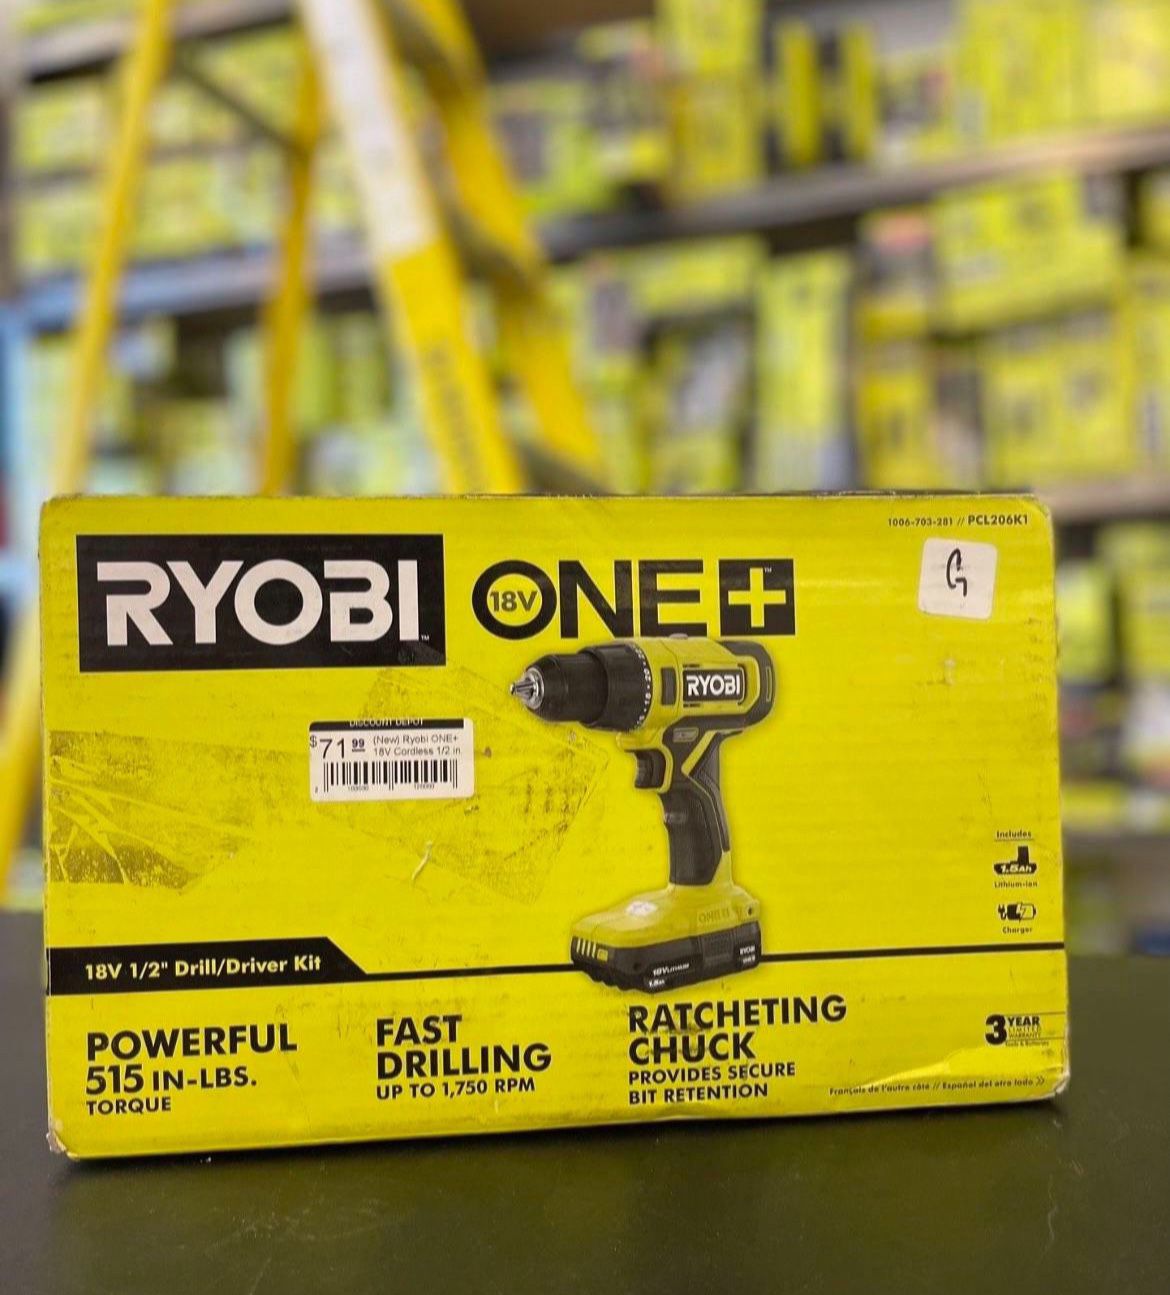 RYOBI ONE+ 18V Cordless 1/2 in. Drill/Driver Kit with (1) 1.5 Ah Battery and Charger PCL206K1